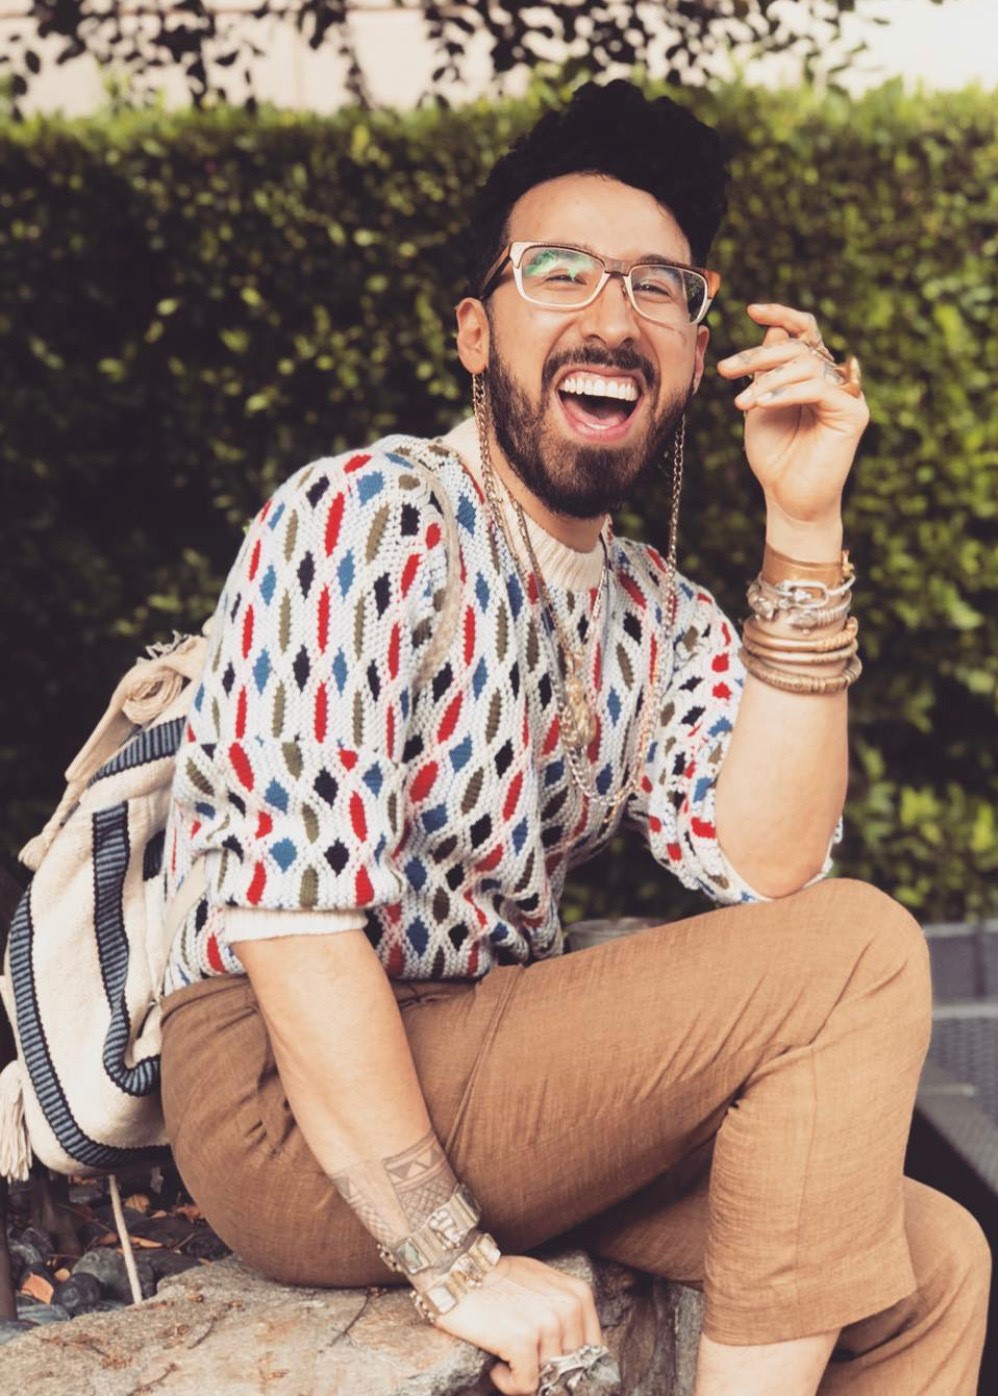 Curly Velasquez smiling wearing a knit sweater, linen pants, and glasses. They are sitting on a stone retaining  wall with a hedge in the background